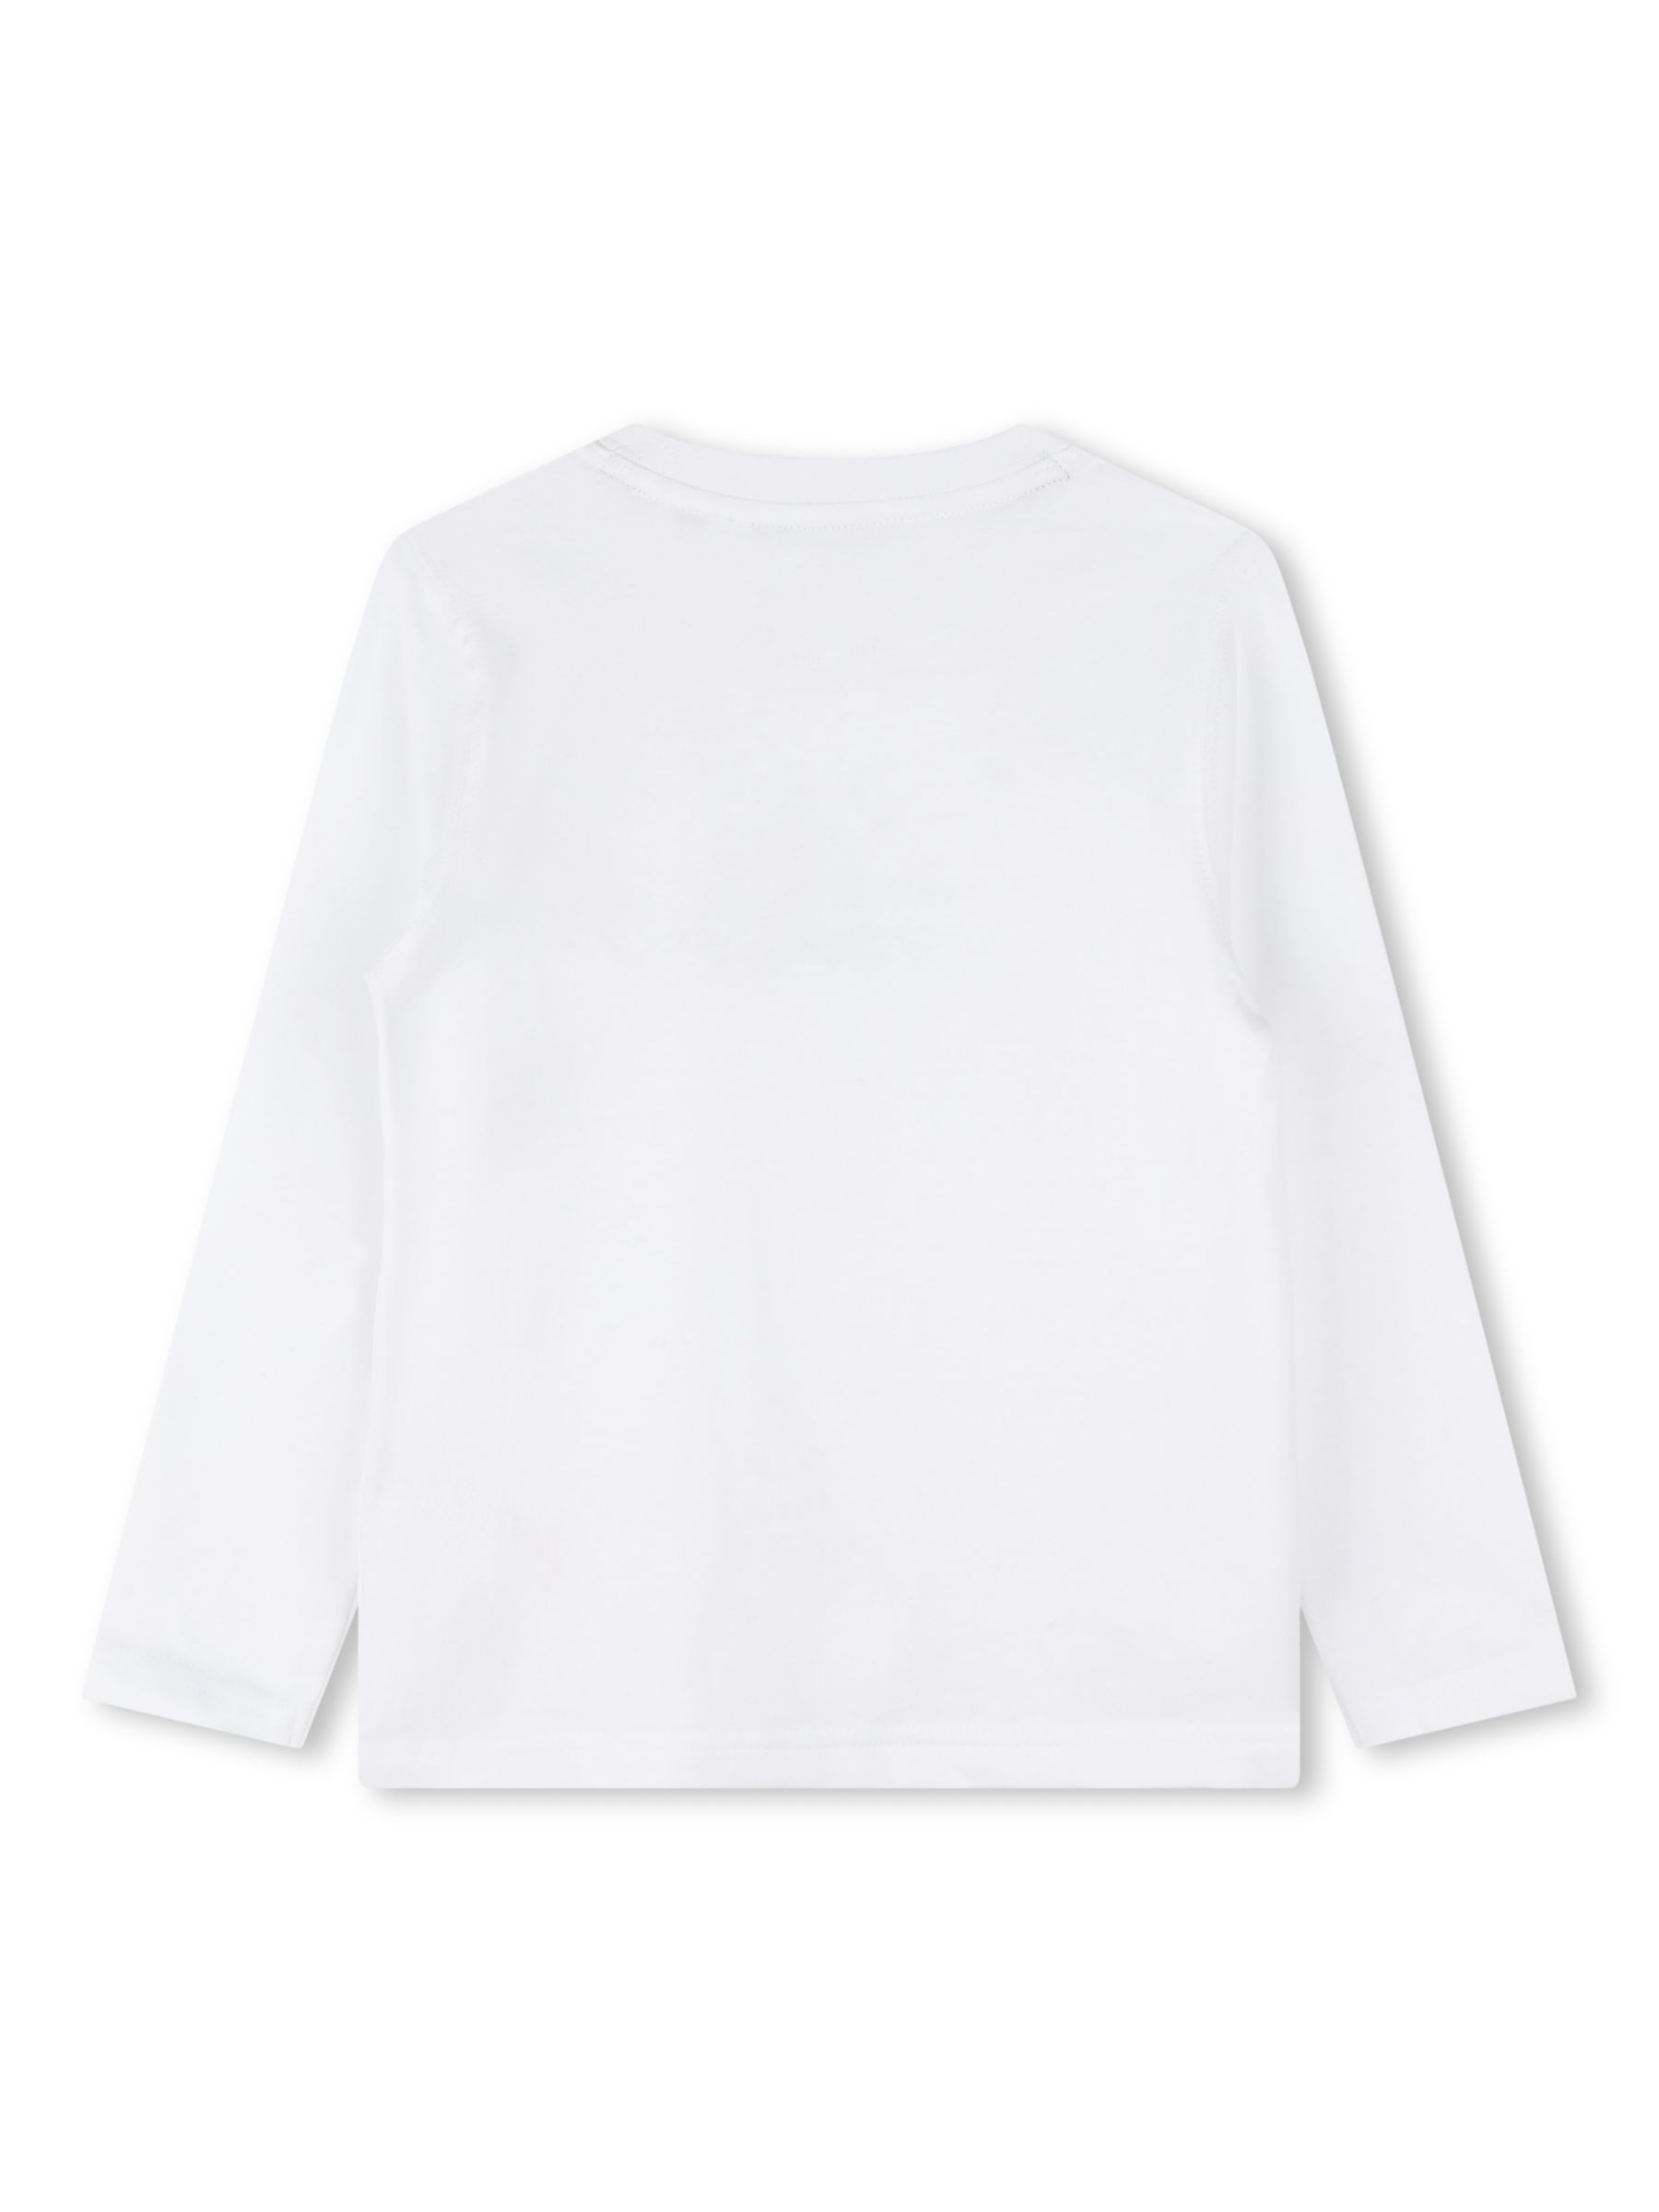 Buy Timberland Kids' Boot Graphic Long Sleeve T-Shirt, White Online at johnlewis.com